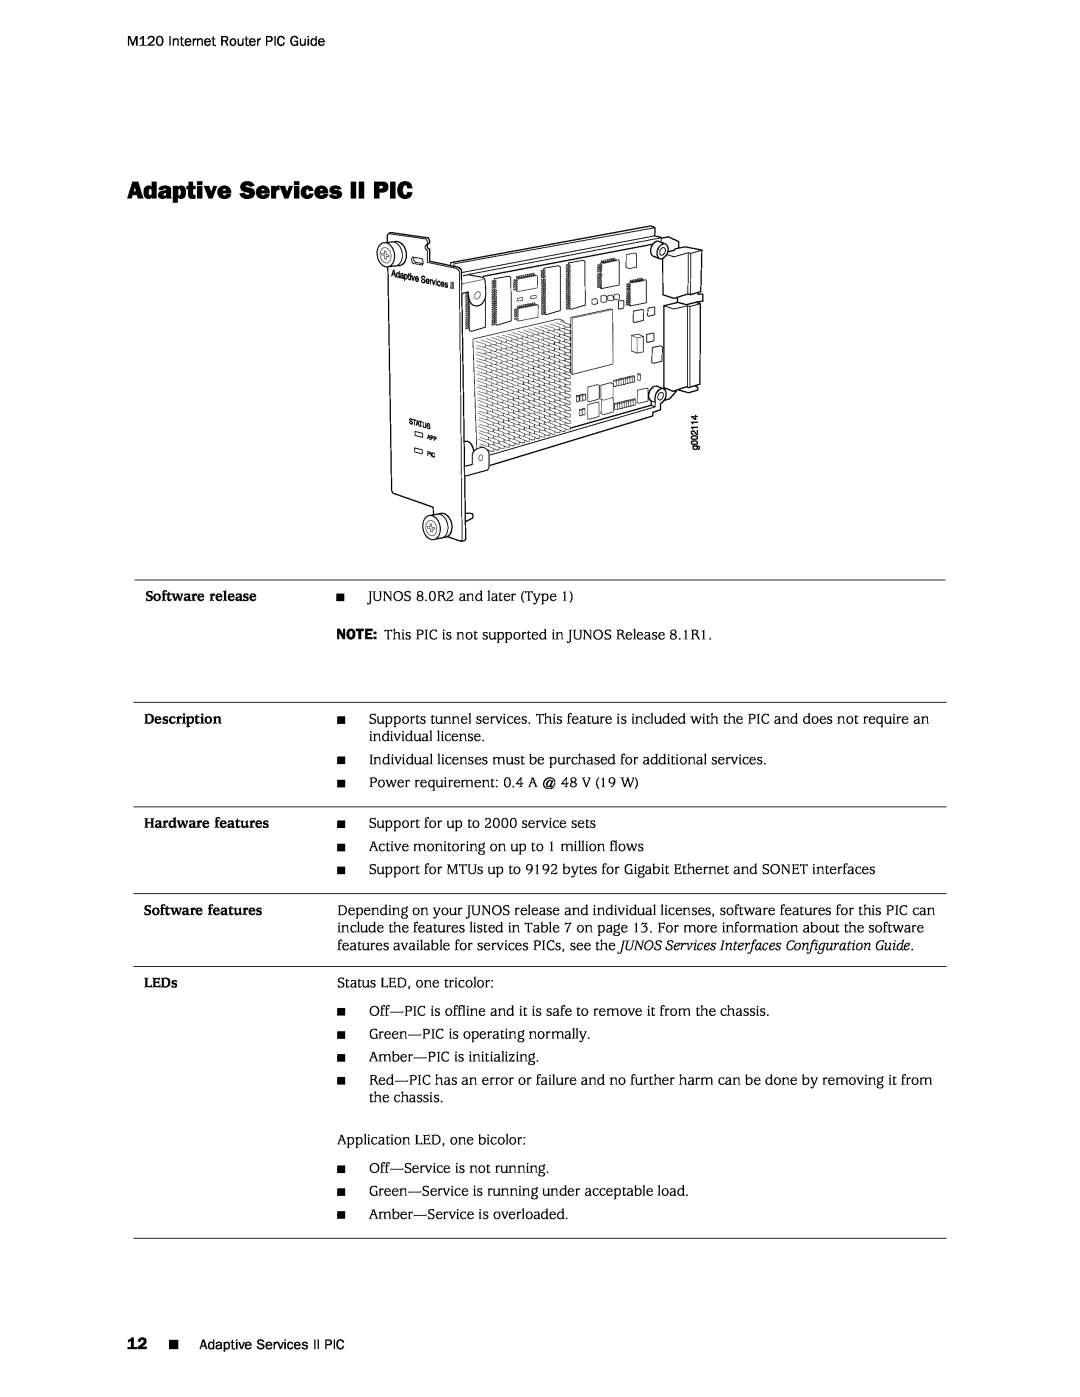 Juniper Networks M120 Adaptive Services II PIC, Software release, Description, Hardware features, Software features, LEDs 